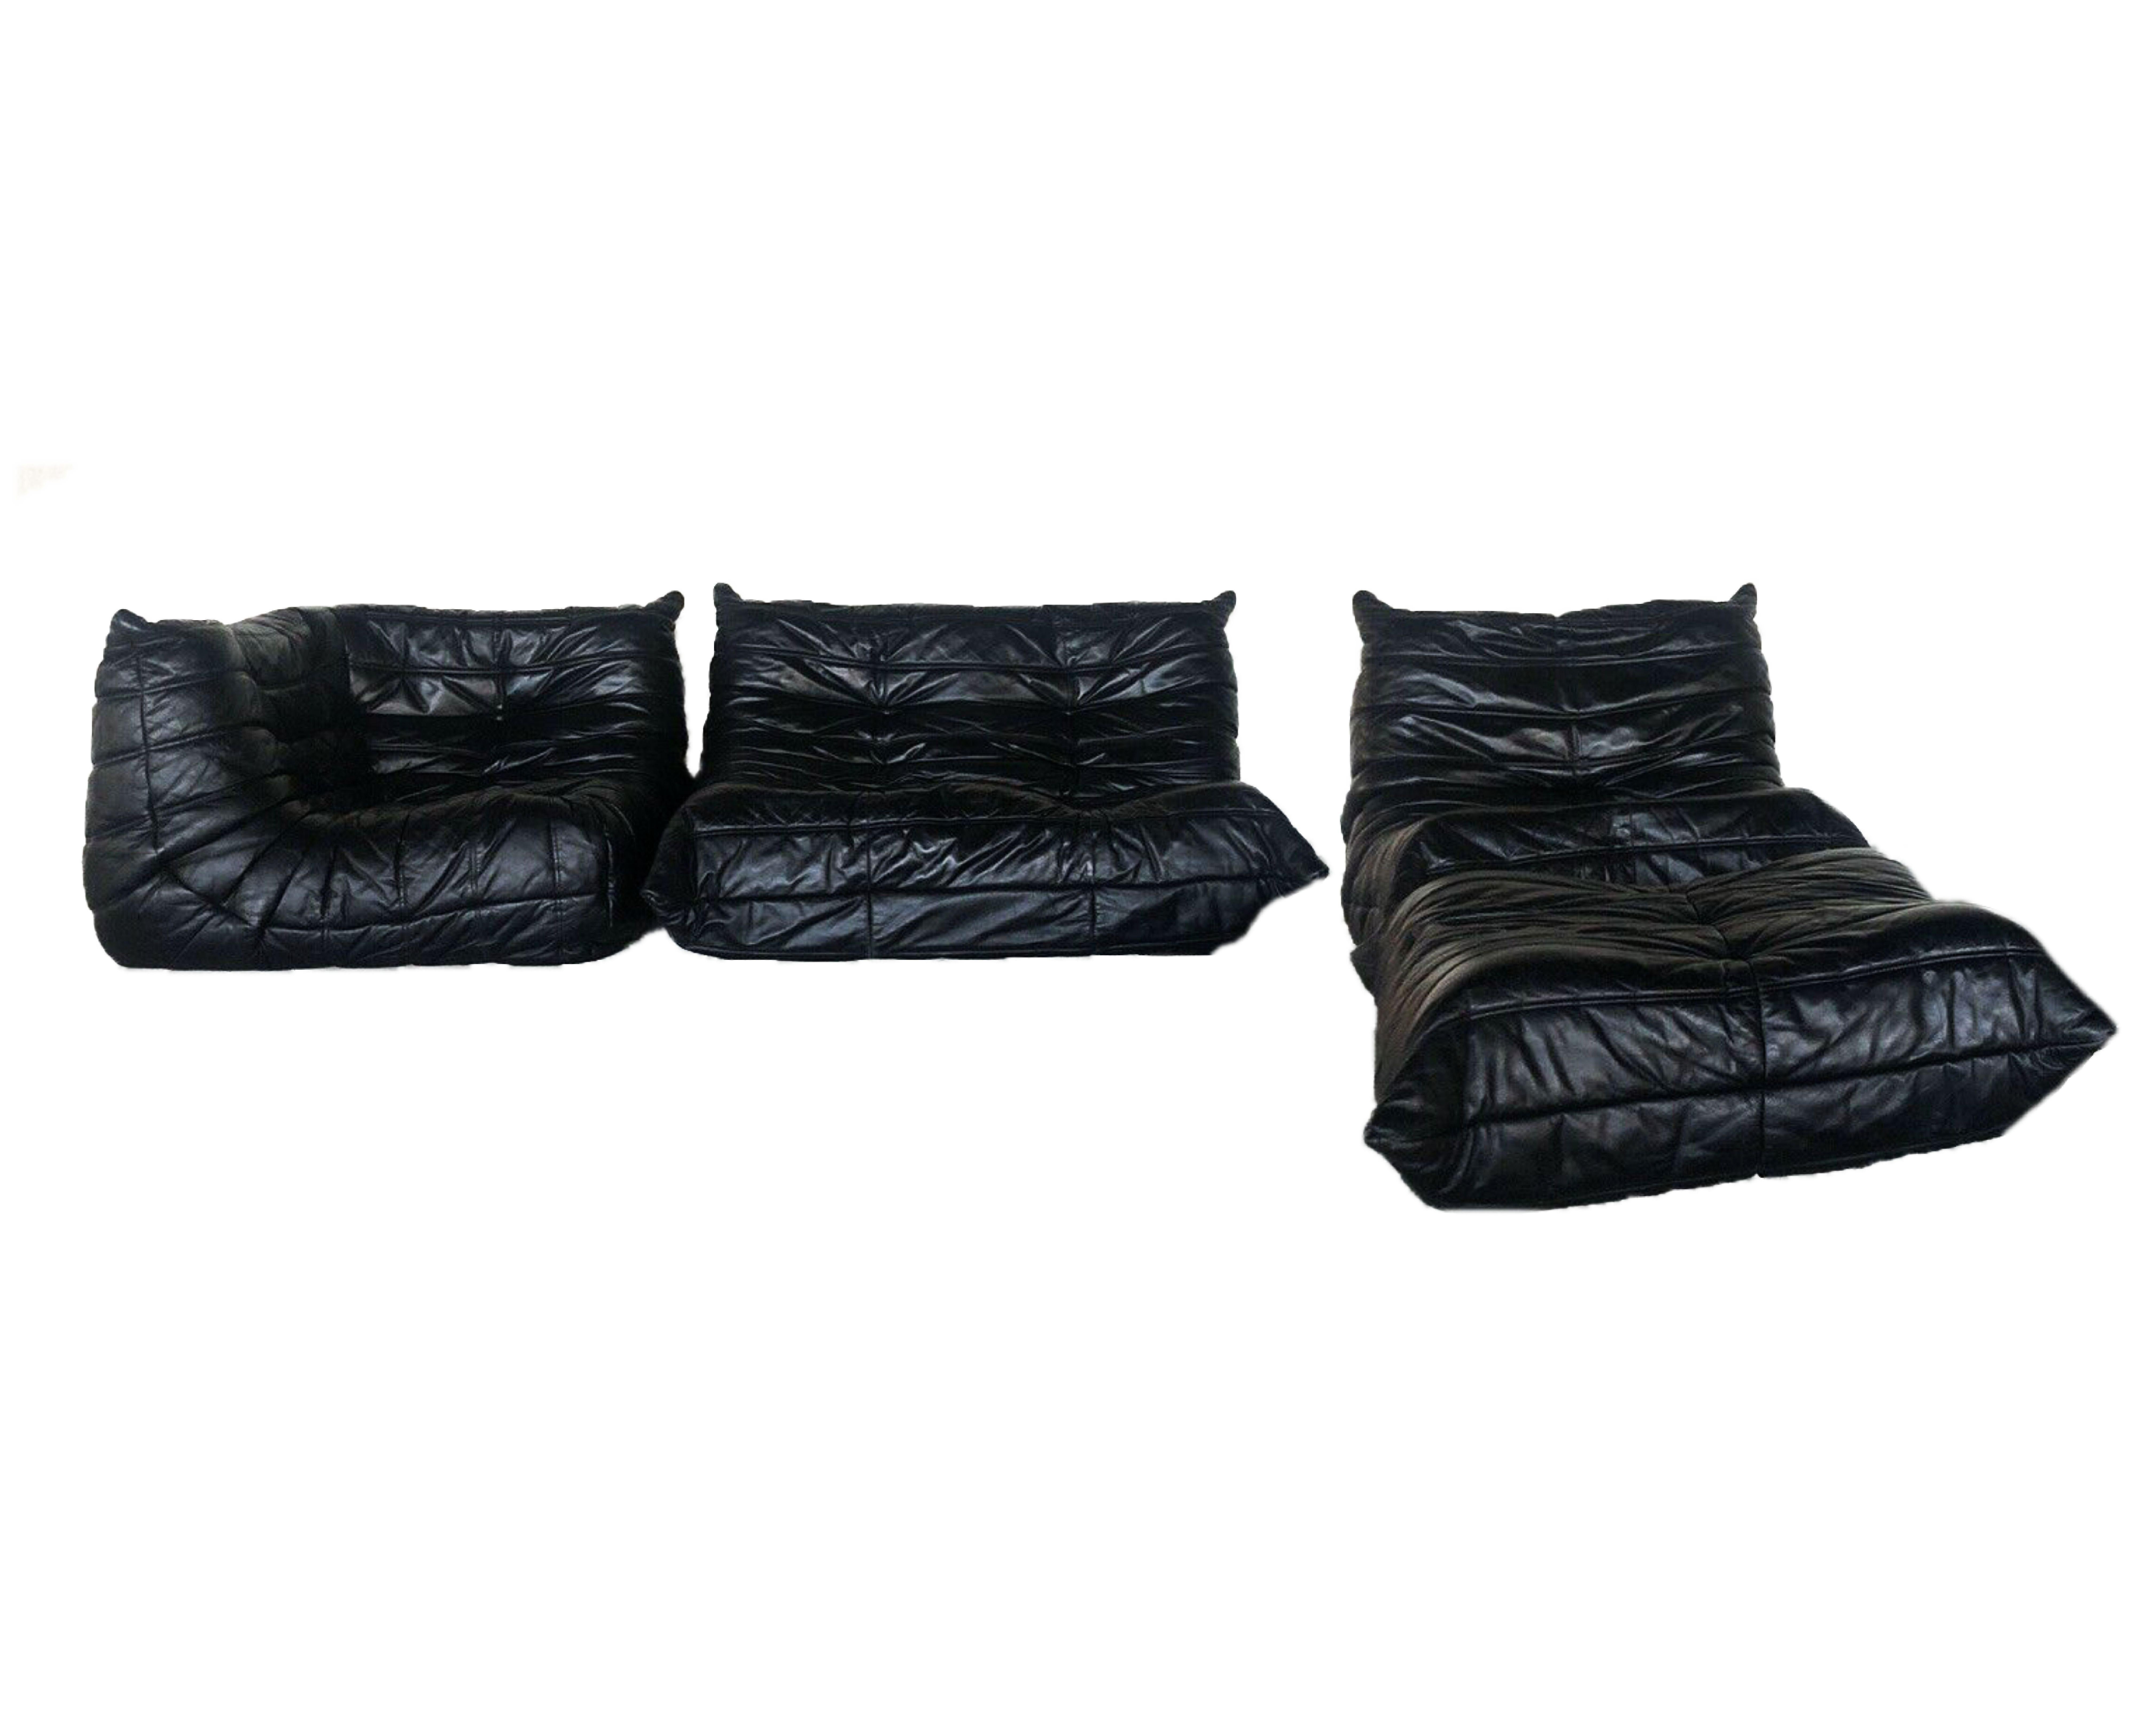 Ligne Roset Togo modular sofa set in black leather by Michel Ducaroy 1970s, Custom.
MSRP 24,000 + USD. One corner, one lounge chair, one ottoman and one two-seat sofa.